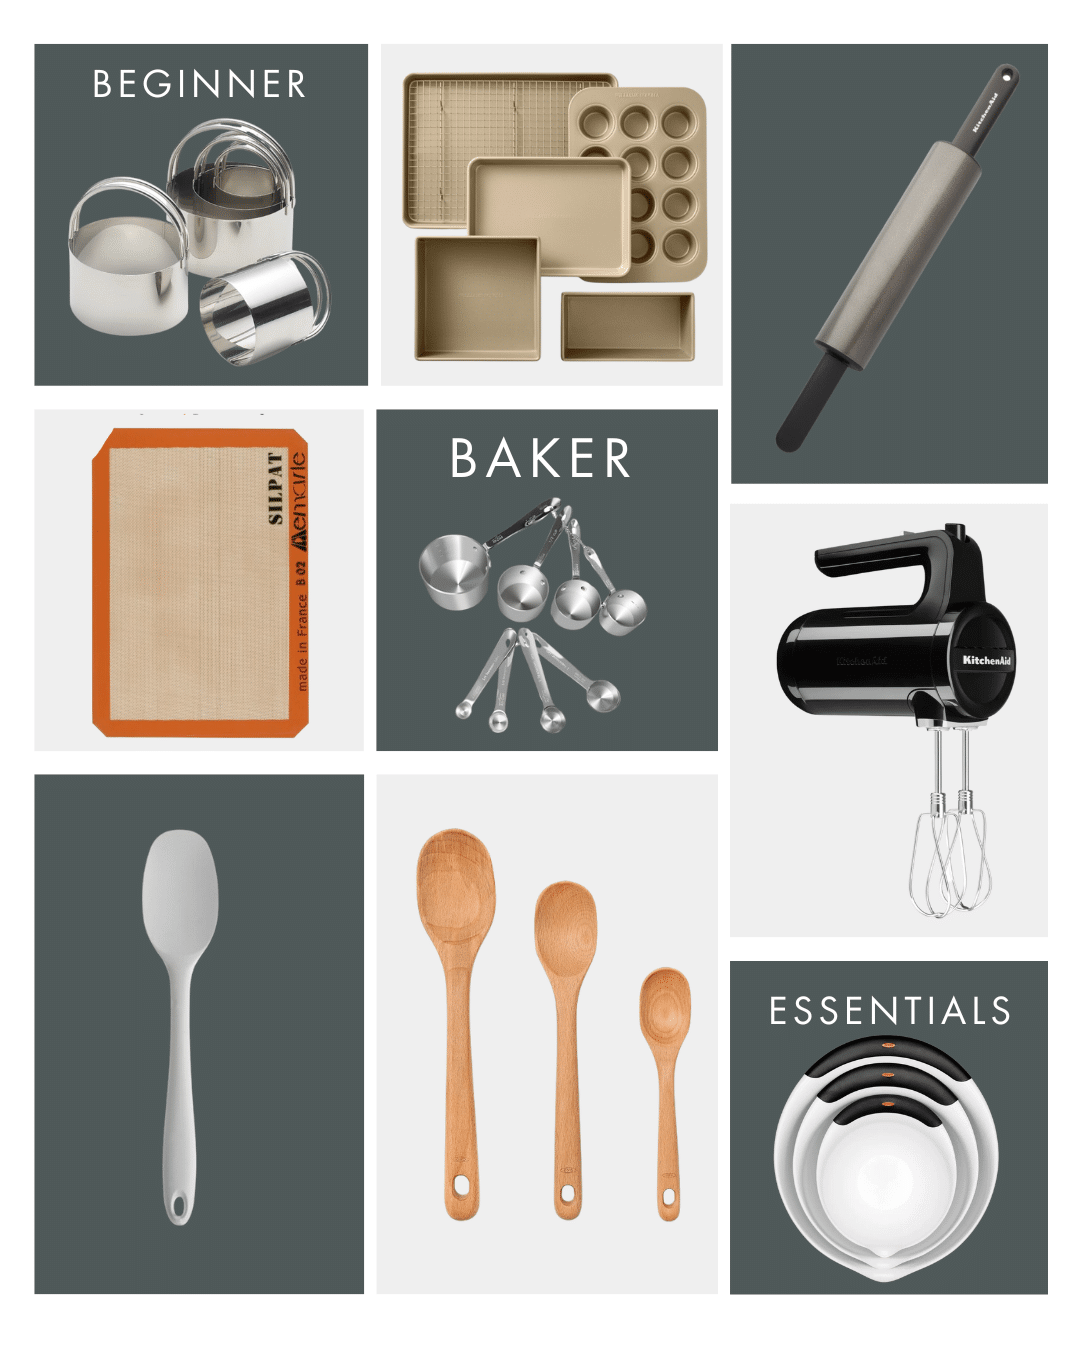 Baking Holiday Gift Guide - The Anthony Kitchen